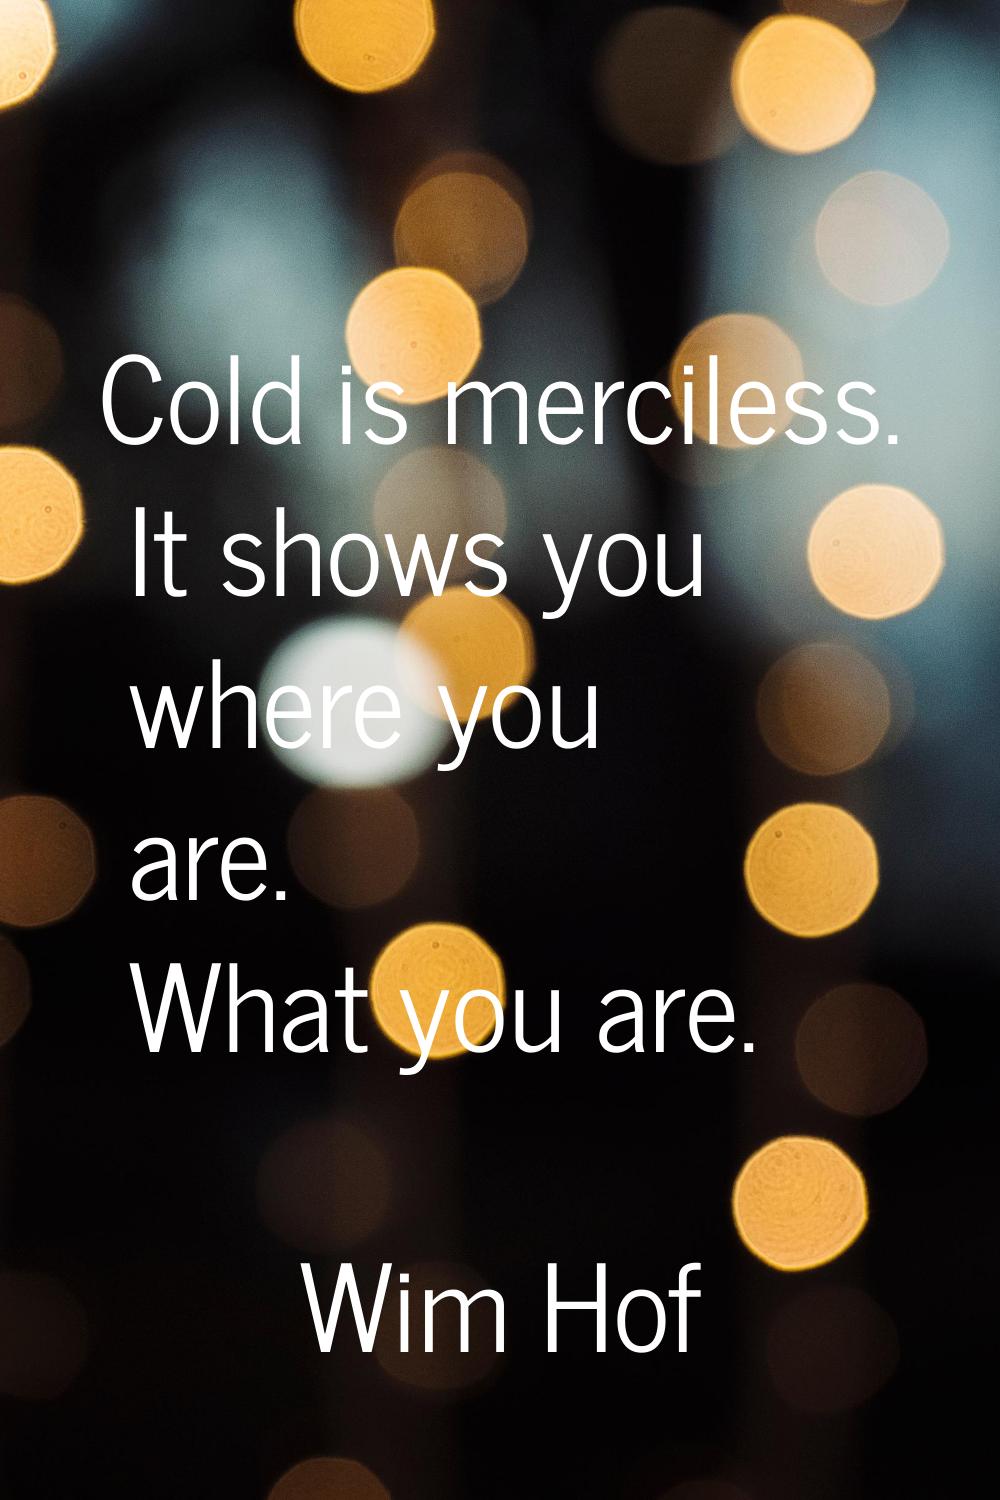 Cold is merciless. It shows you where you are. What you are.